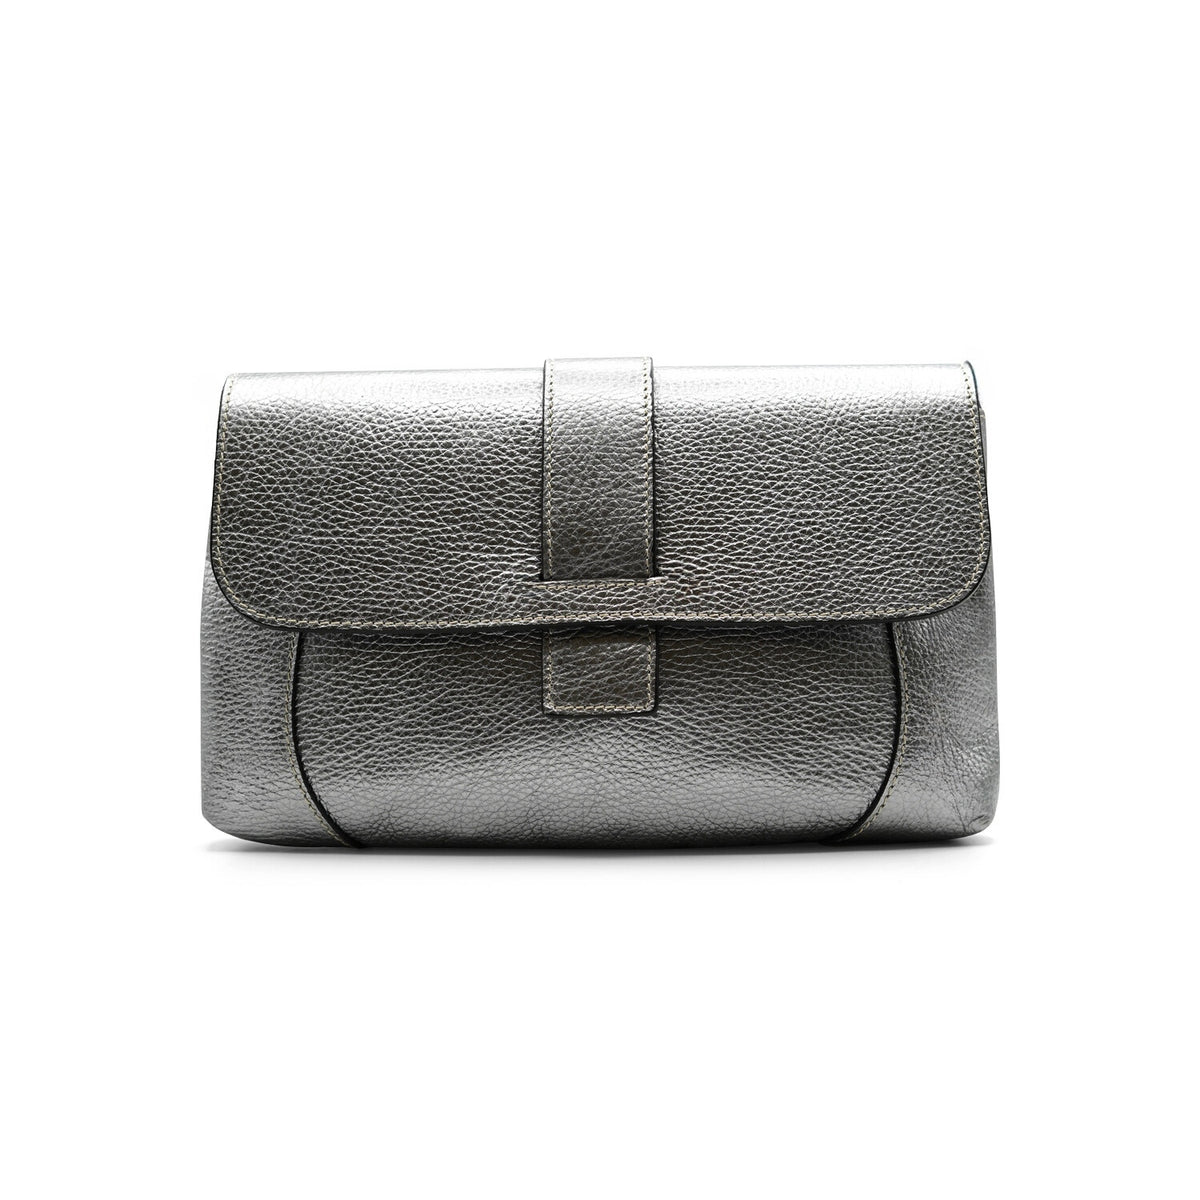 Fits Everything Clutch / Crossbody - Antique Silver